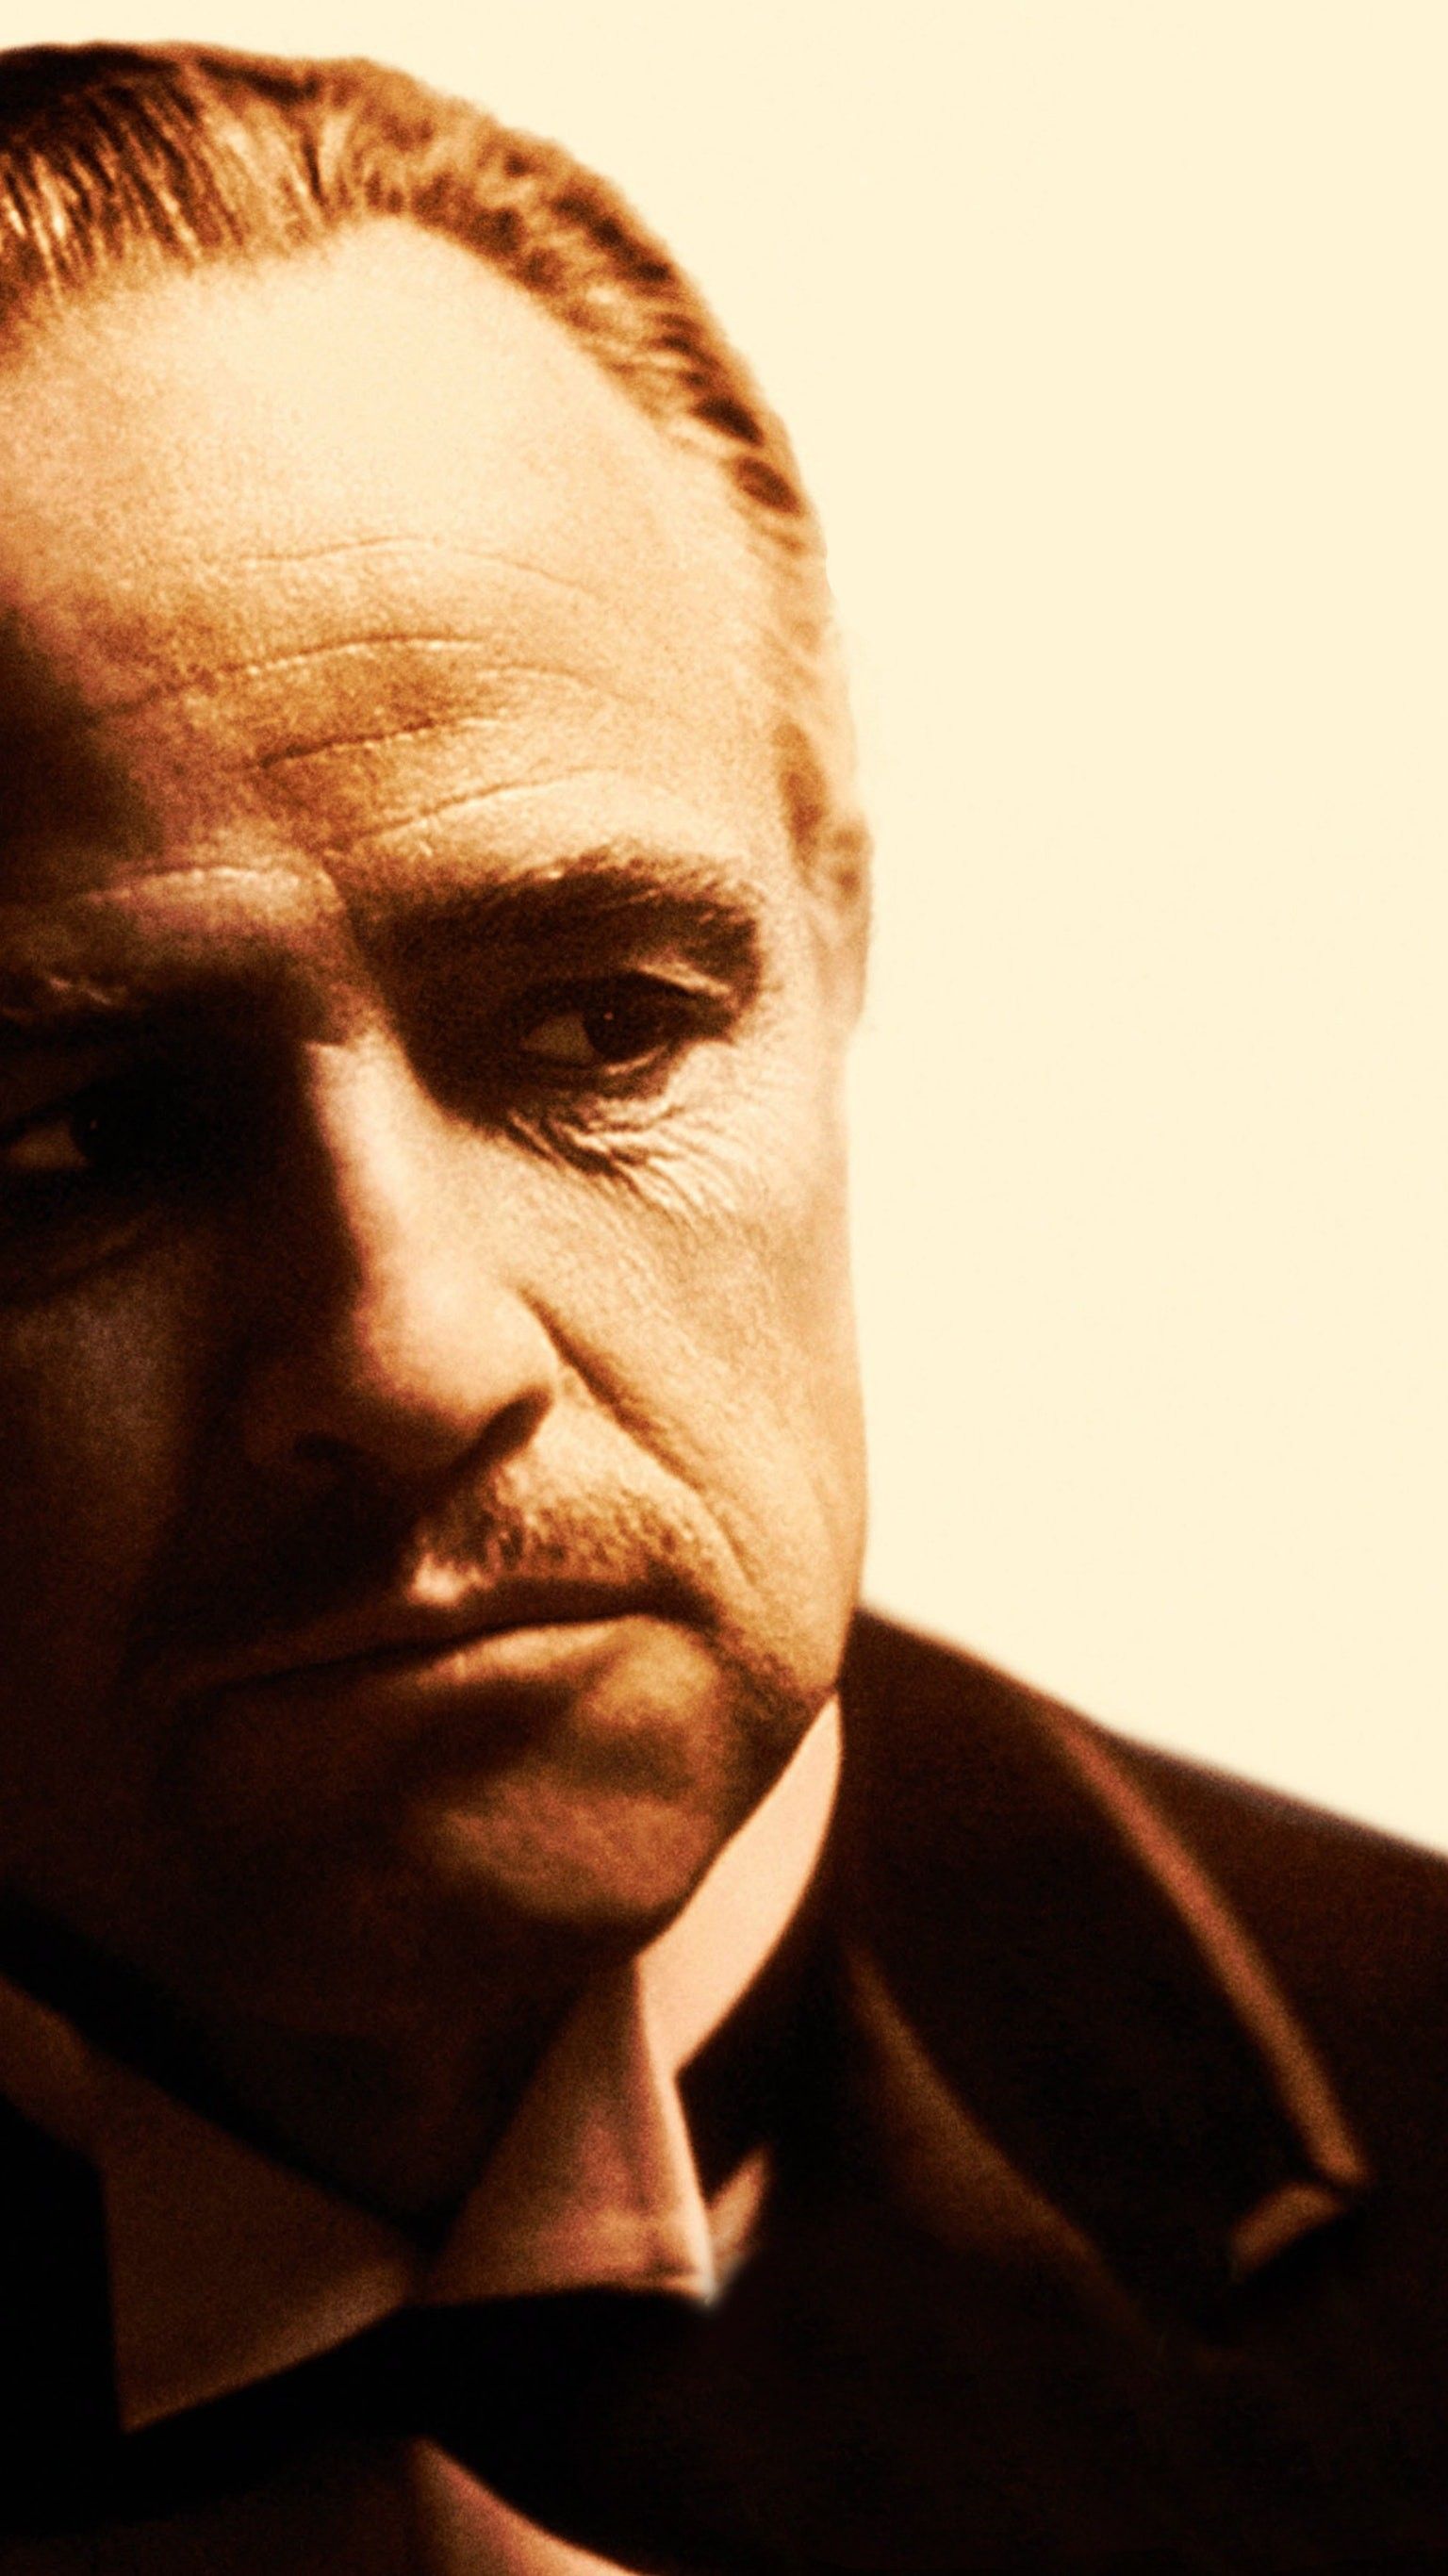 Wallpaper For The Godfather - Godfather Movie , HD Wallpaper & Backgrounds